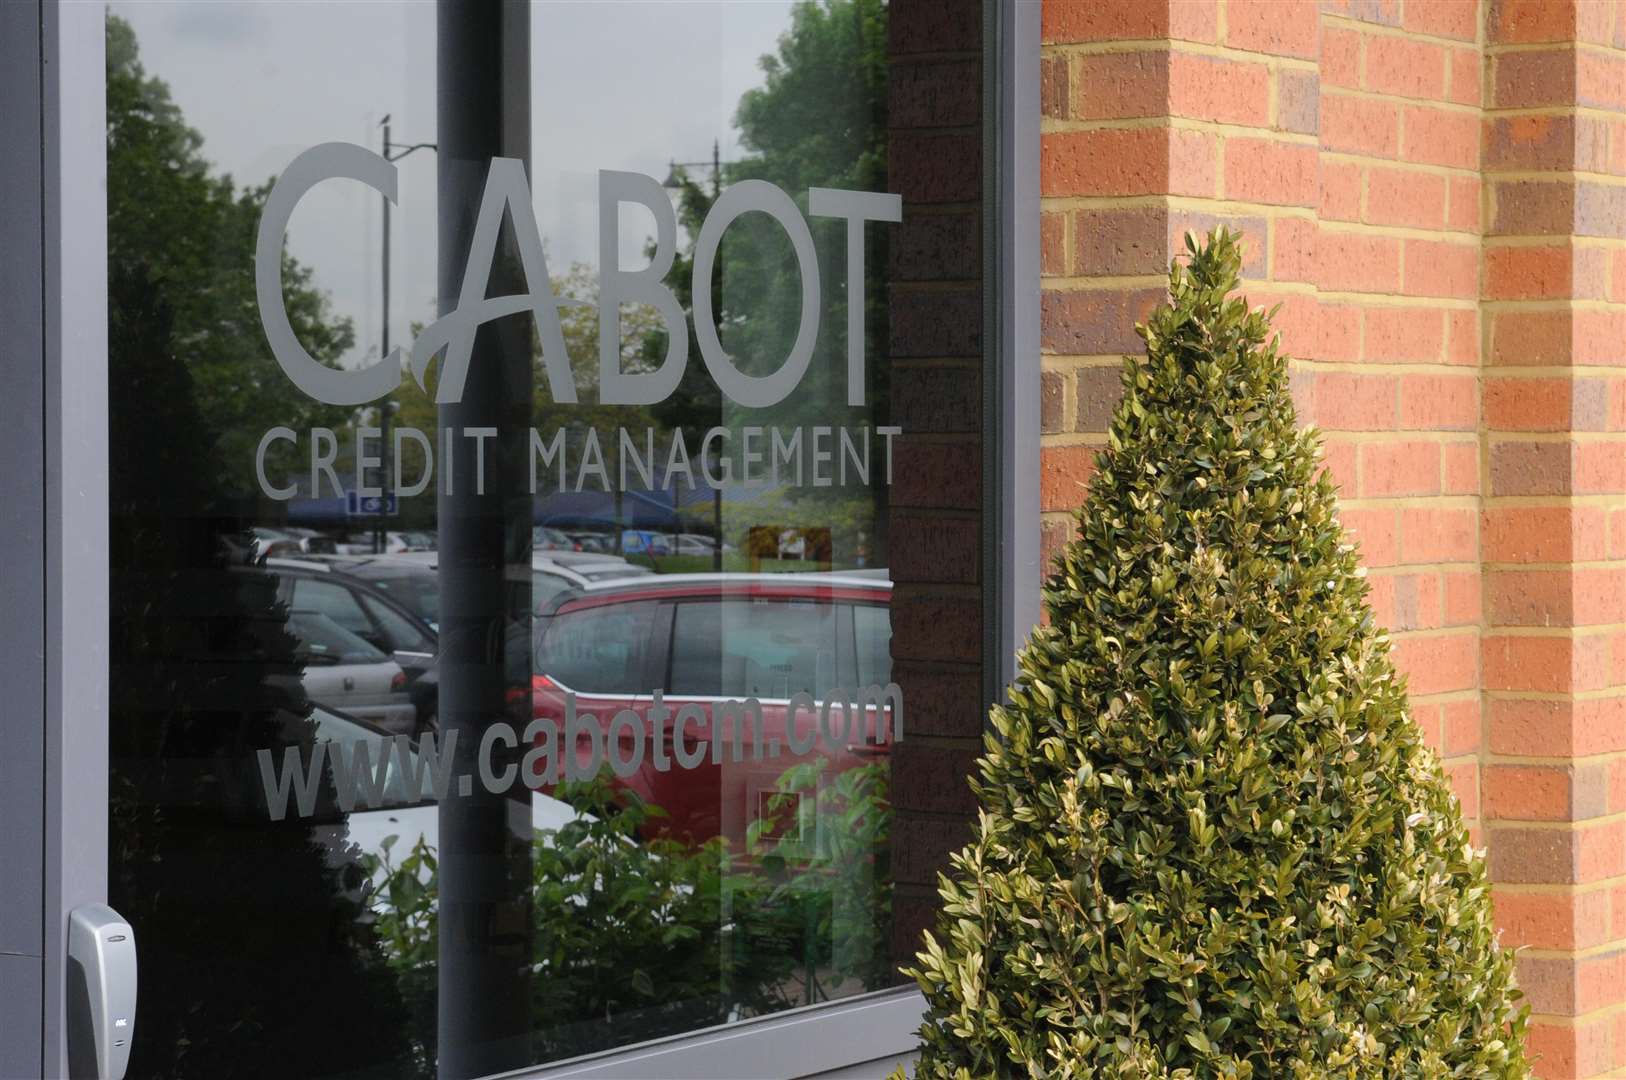 Cabot financial business, based in Kings Hill. Picture: Wayne McCabe